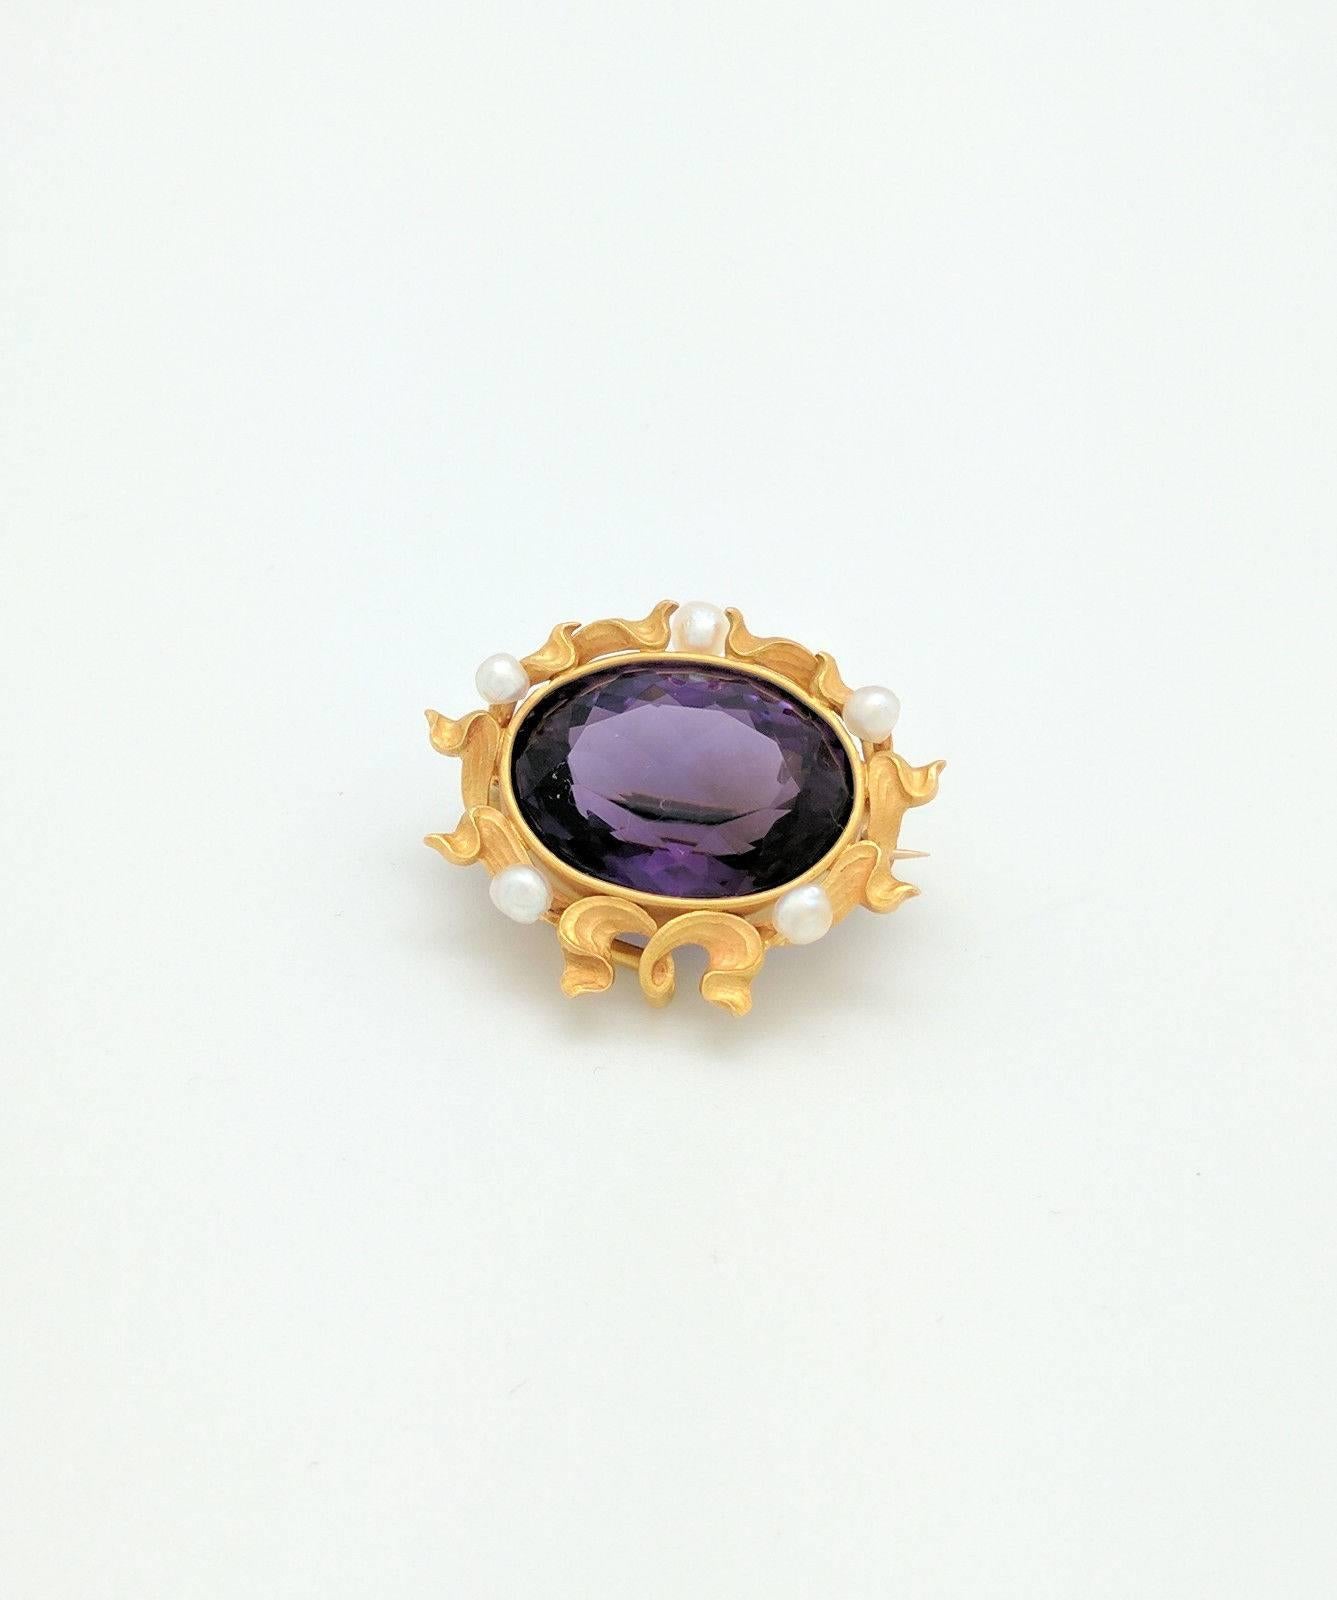 Vintage 14k Yellow Gold Amethyst and Seed Pearl Brooch Pin

You are viewing a Beautiful Vintage Amethyst & Seed Pearl Brooch Pin.  This brooch is crafted from 14k yellow gold and weigh 9.9 grams. It features (1) 20mm x 15mm natural oval shaped